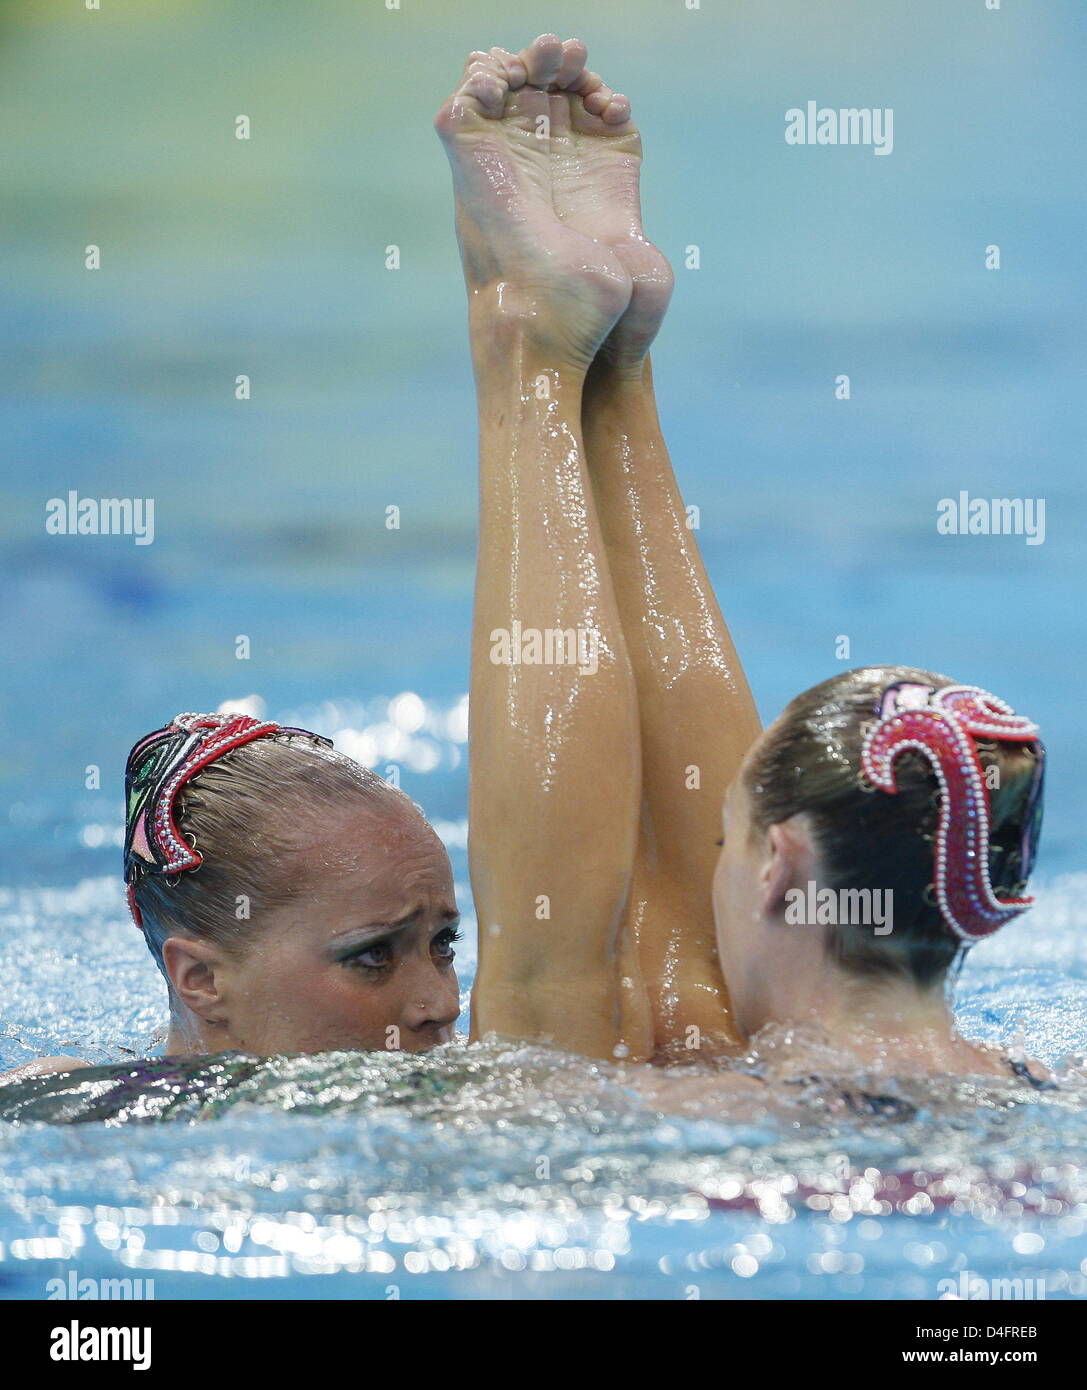 Christina Jones and Andrea Nott of the US are doing their exercise at the women·s Free Routine Final of the Synchronized Swimming competition at the Beijing 2008 Olympic Games, Beijing, China, 20 August 2008. Photo: Marcus Brandt ###dpa### Stock Photo